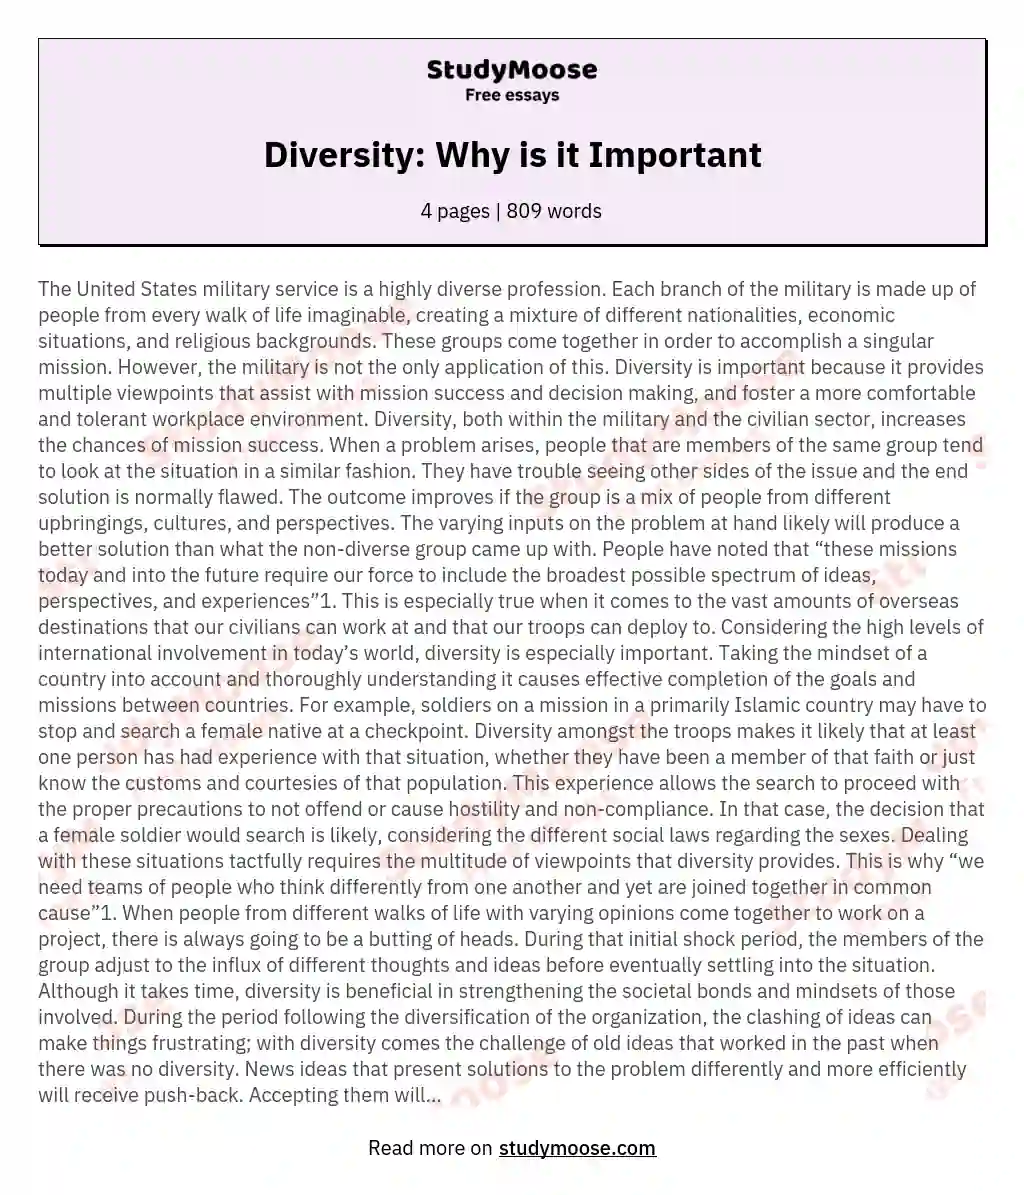 Diversity: Why is it Important essay